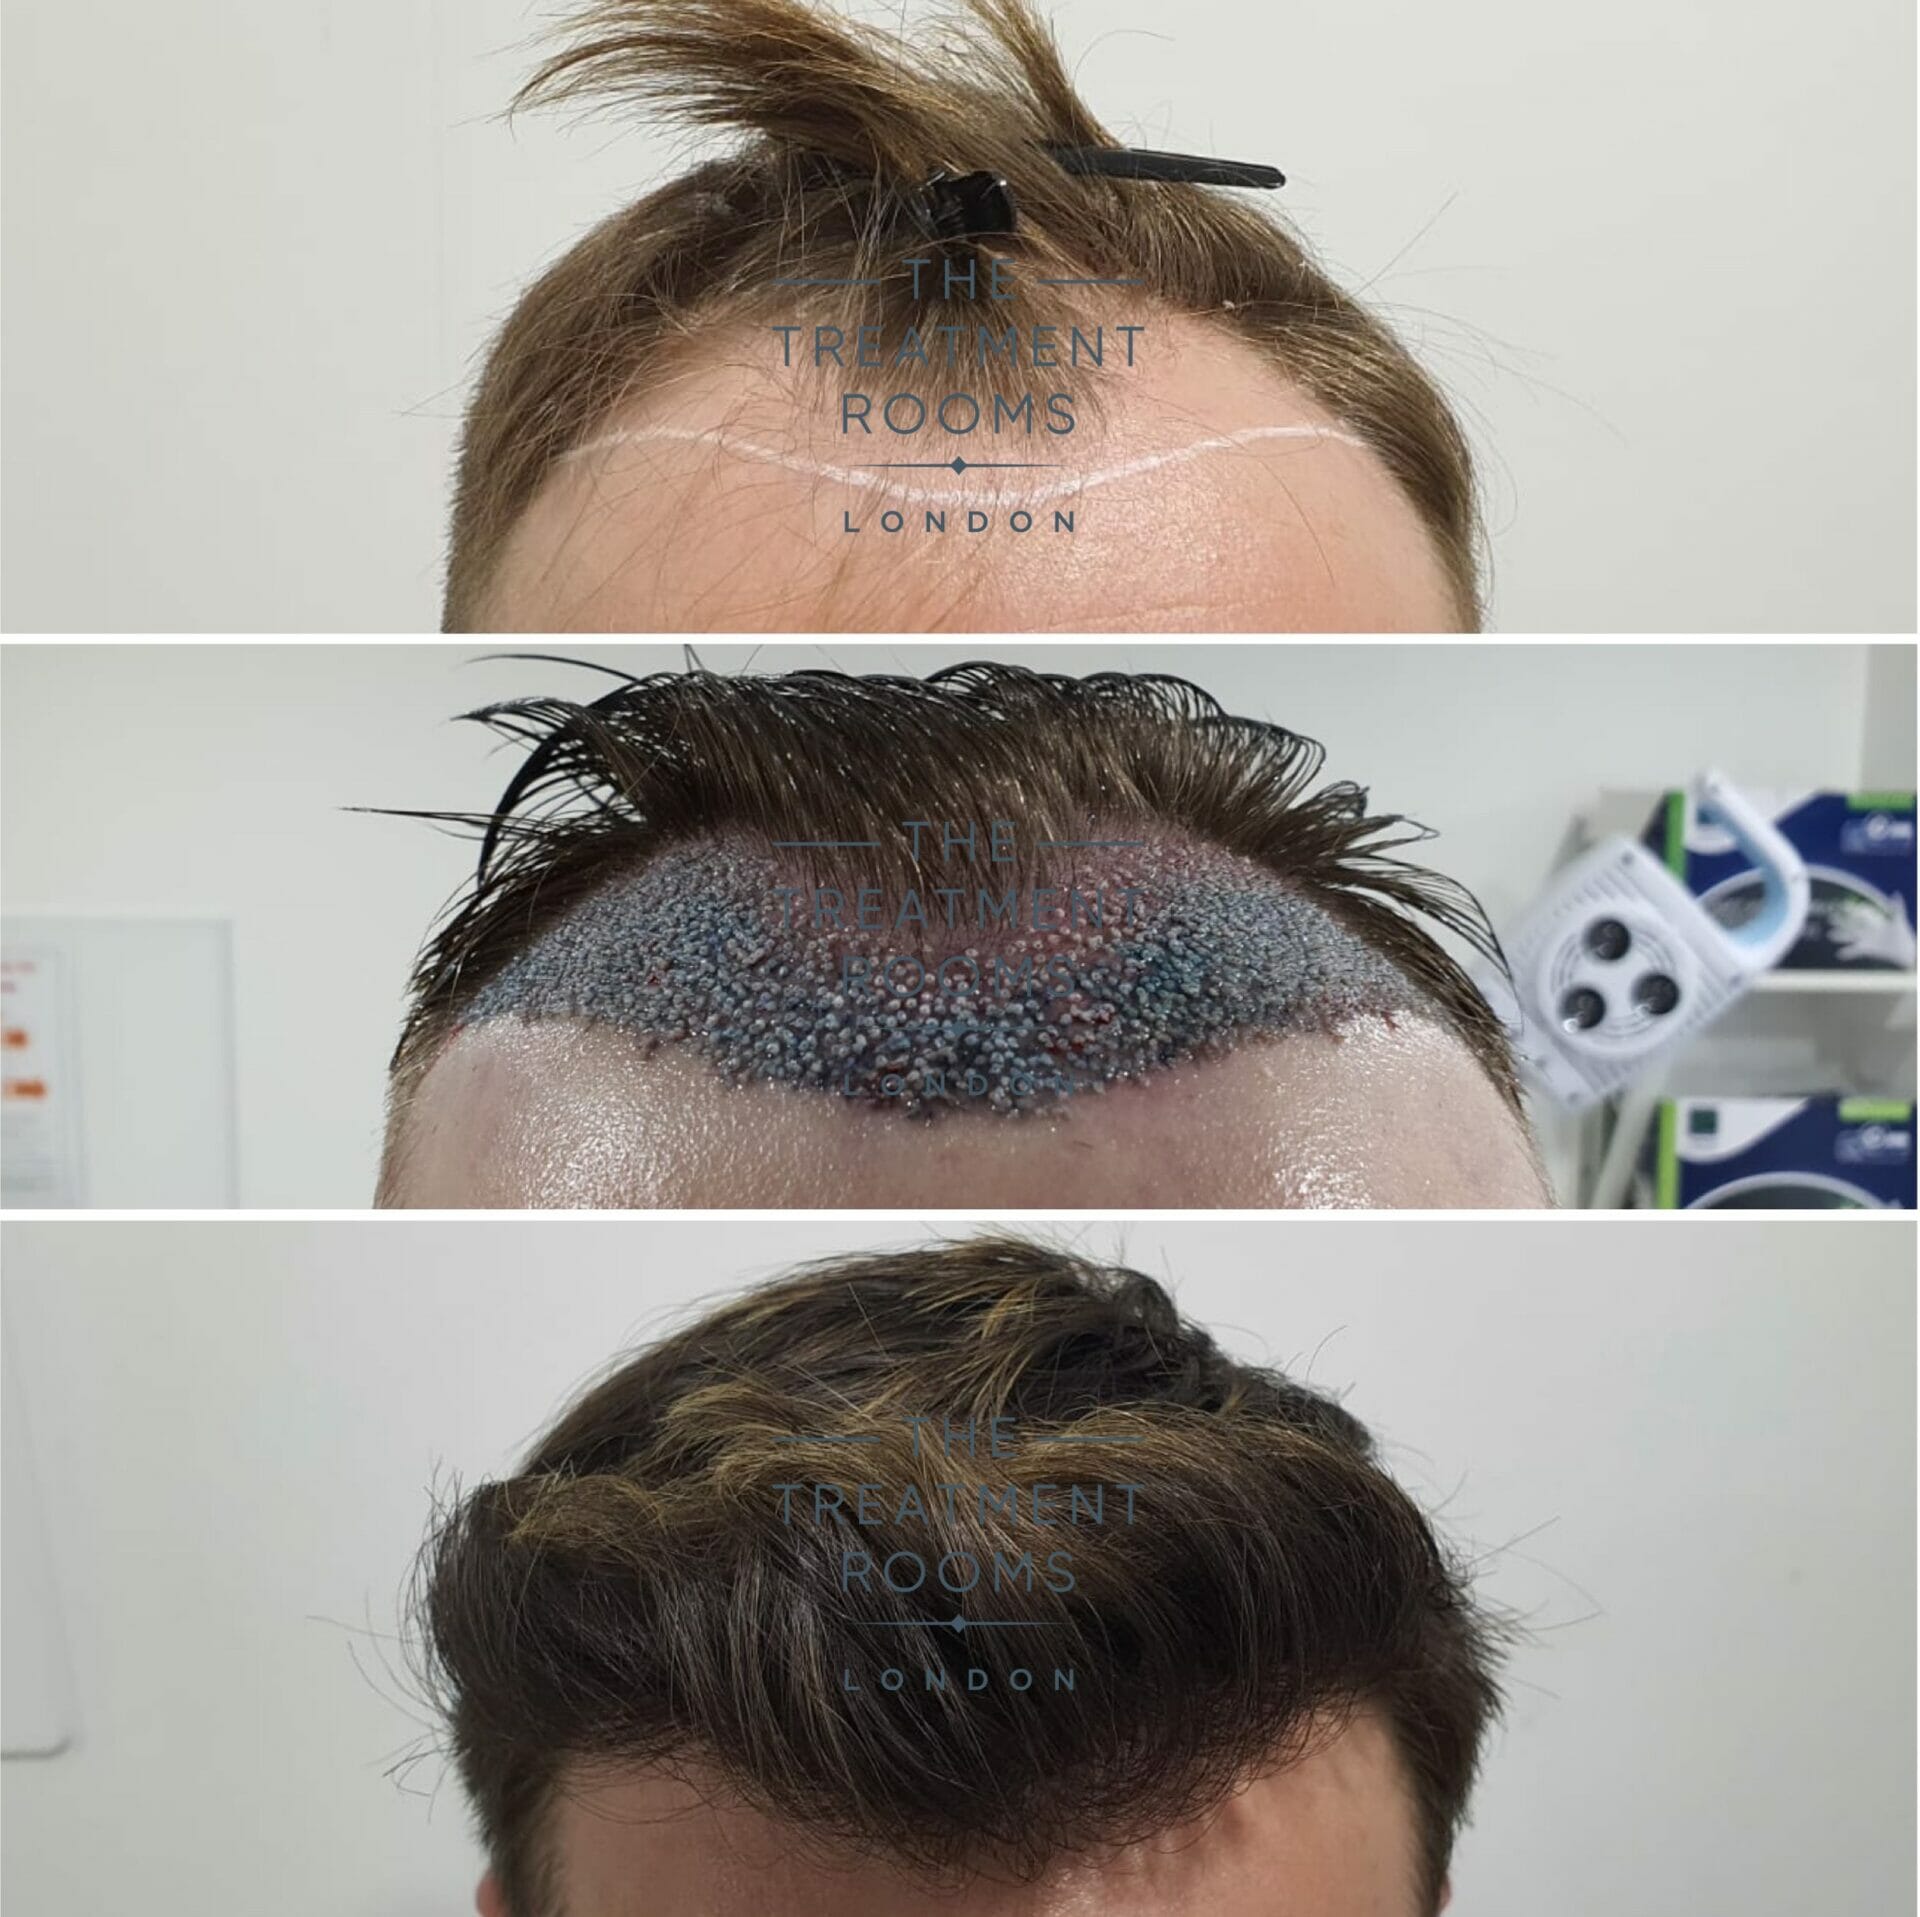 When Can You Go Back To Work After A Hair Transplant?